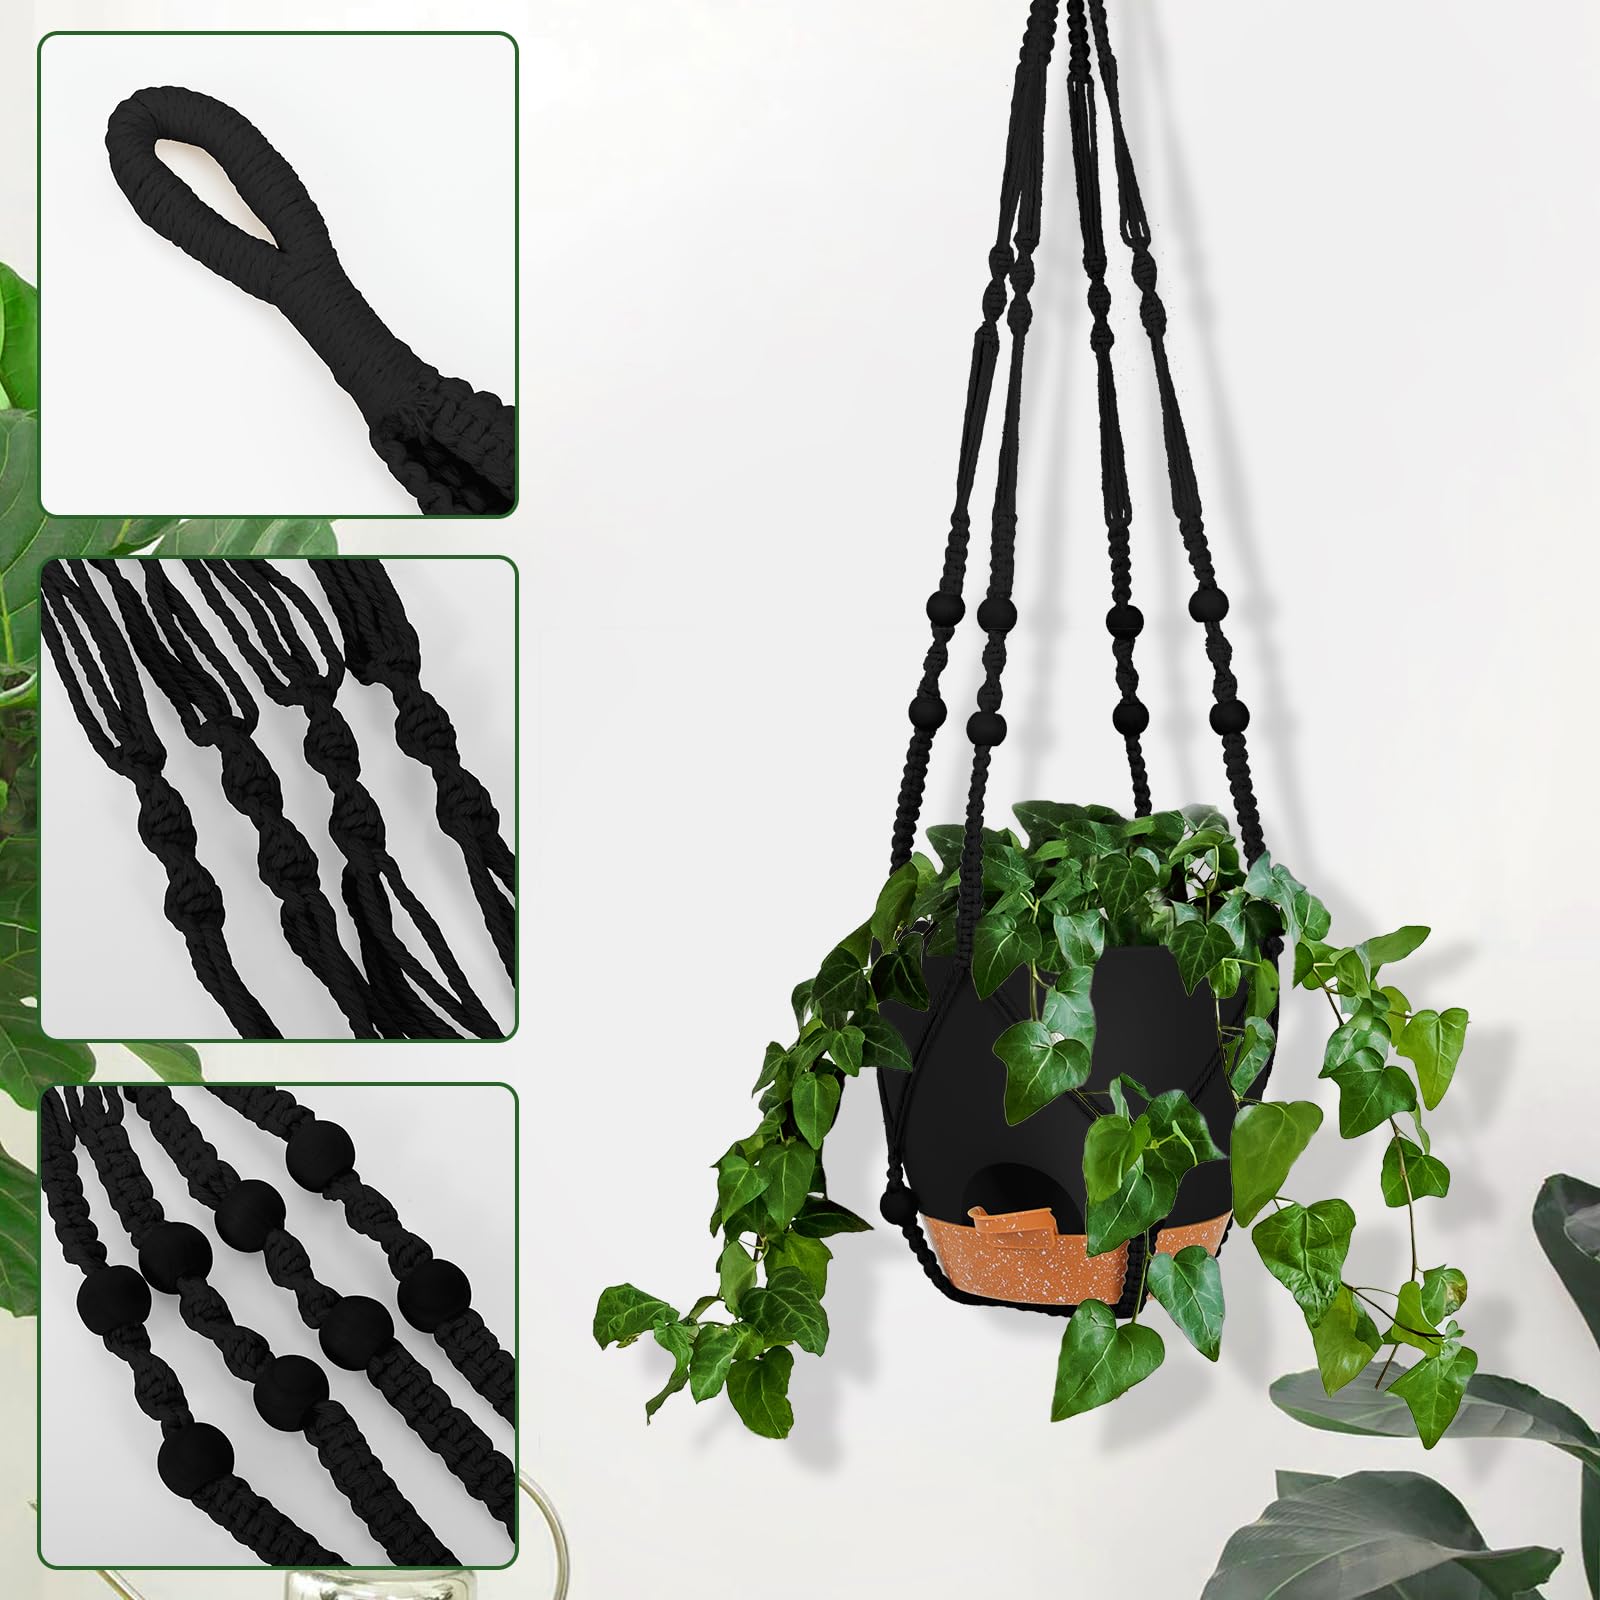 GARDIFE 8 Inch Hanging Planters with Macrame Plant Hanger for Indoor and Outdoor Plants, 2 Pack Large Self Watering Hanging Plant Pot with Basket Flower Pot with Drainage Hole, Black